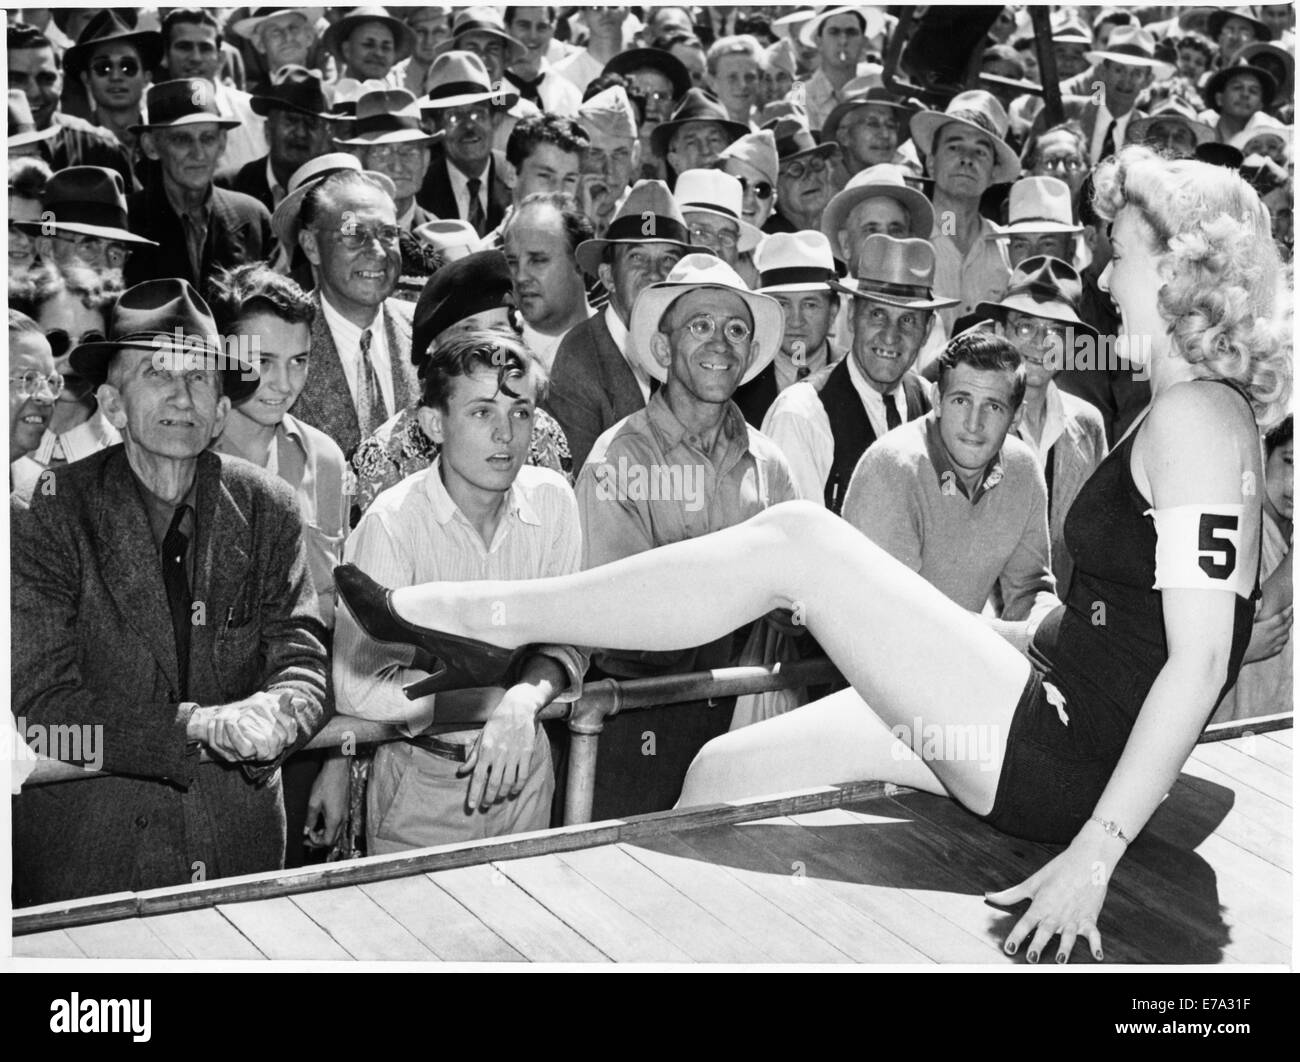 All-Male Crowd Watching Contestant in one-piece Bathing Suit Perform during Beauty Contest, Los Angeles, California, USA, 1943 Stock Photo